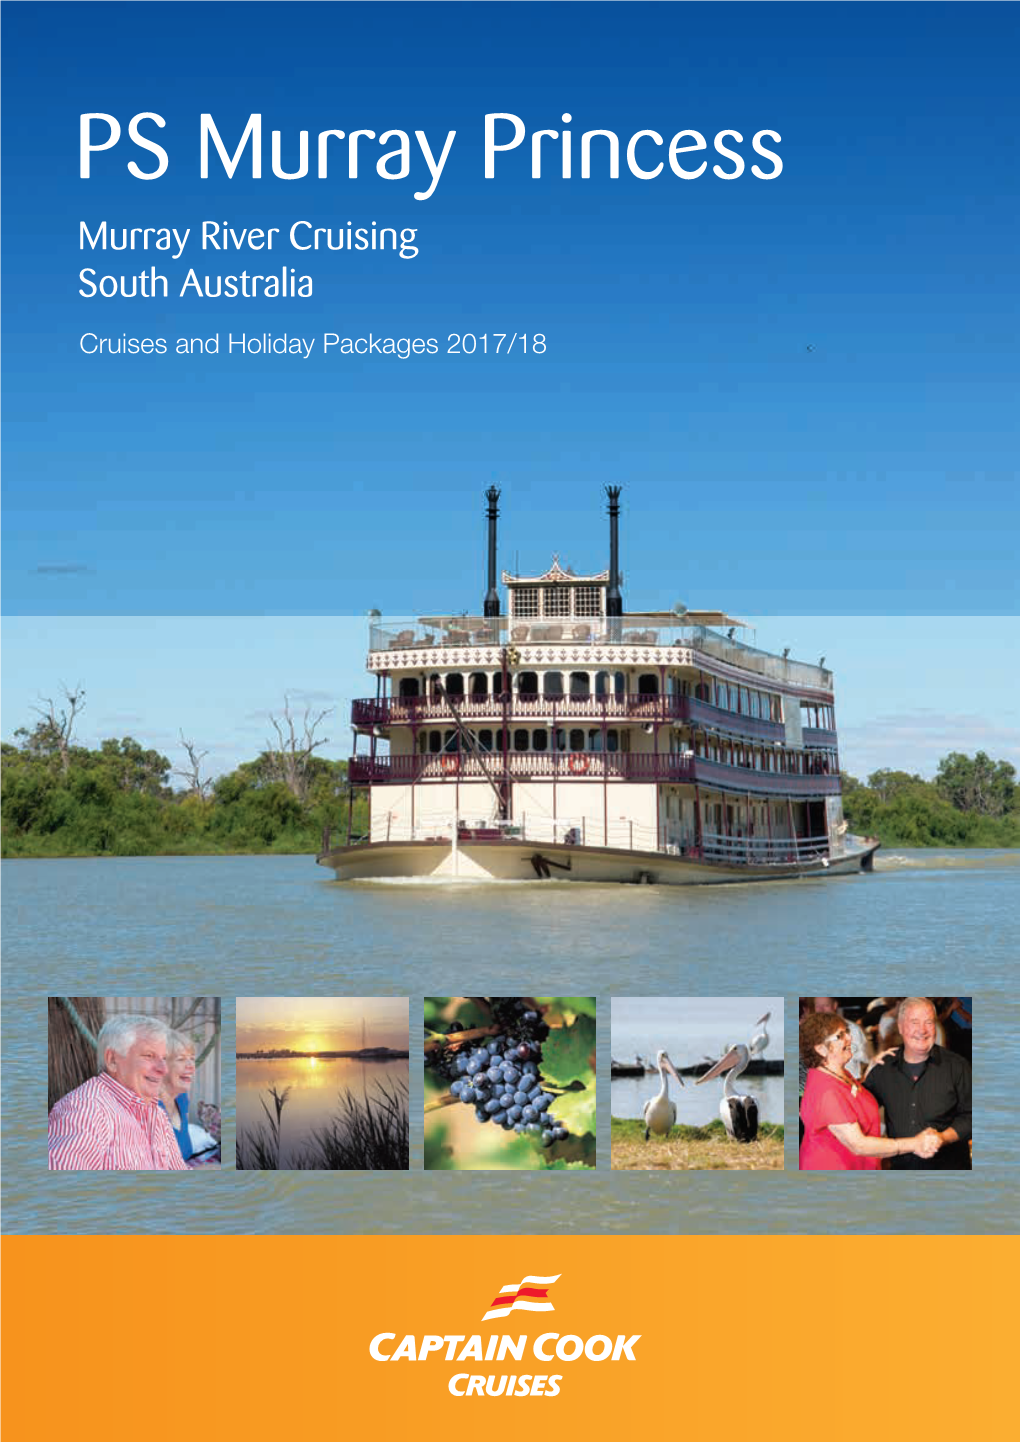 PS Murray Princess Murray River Cruising South Australia Cruises and Holiday Packages 2017/18 Relax, Discover, Enjoy